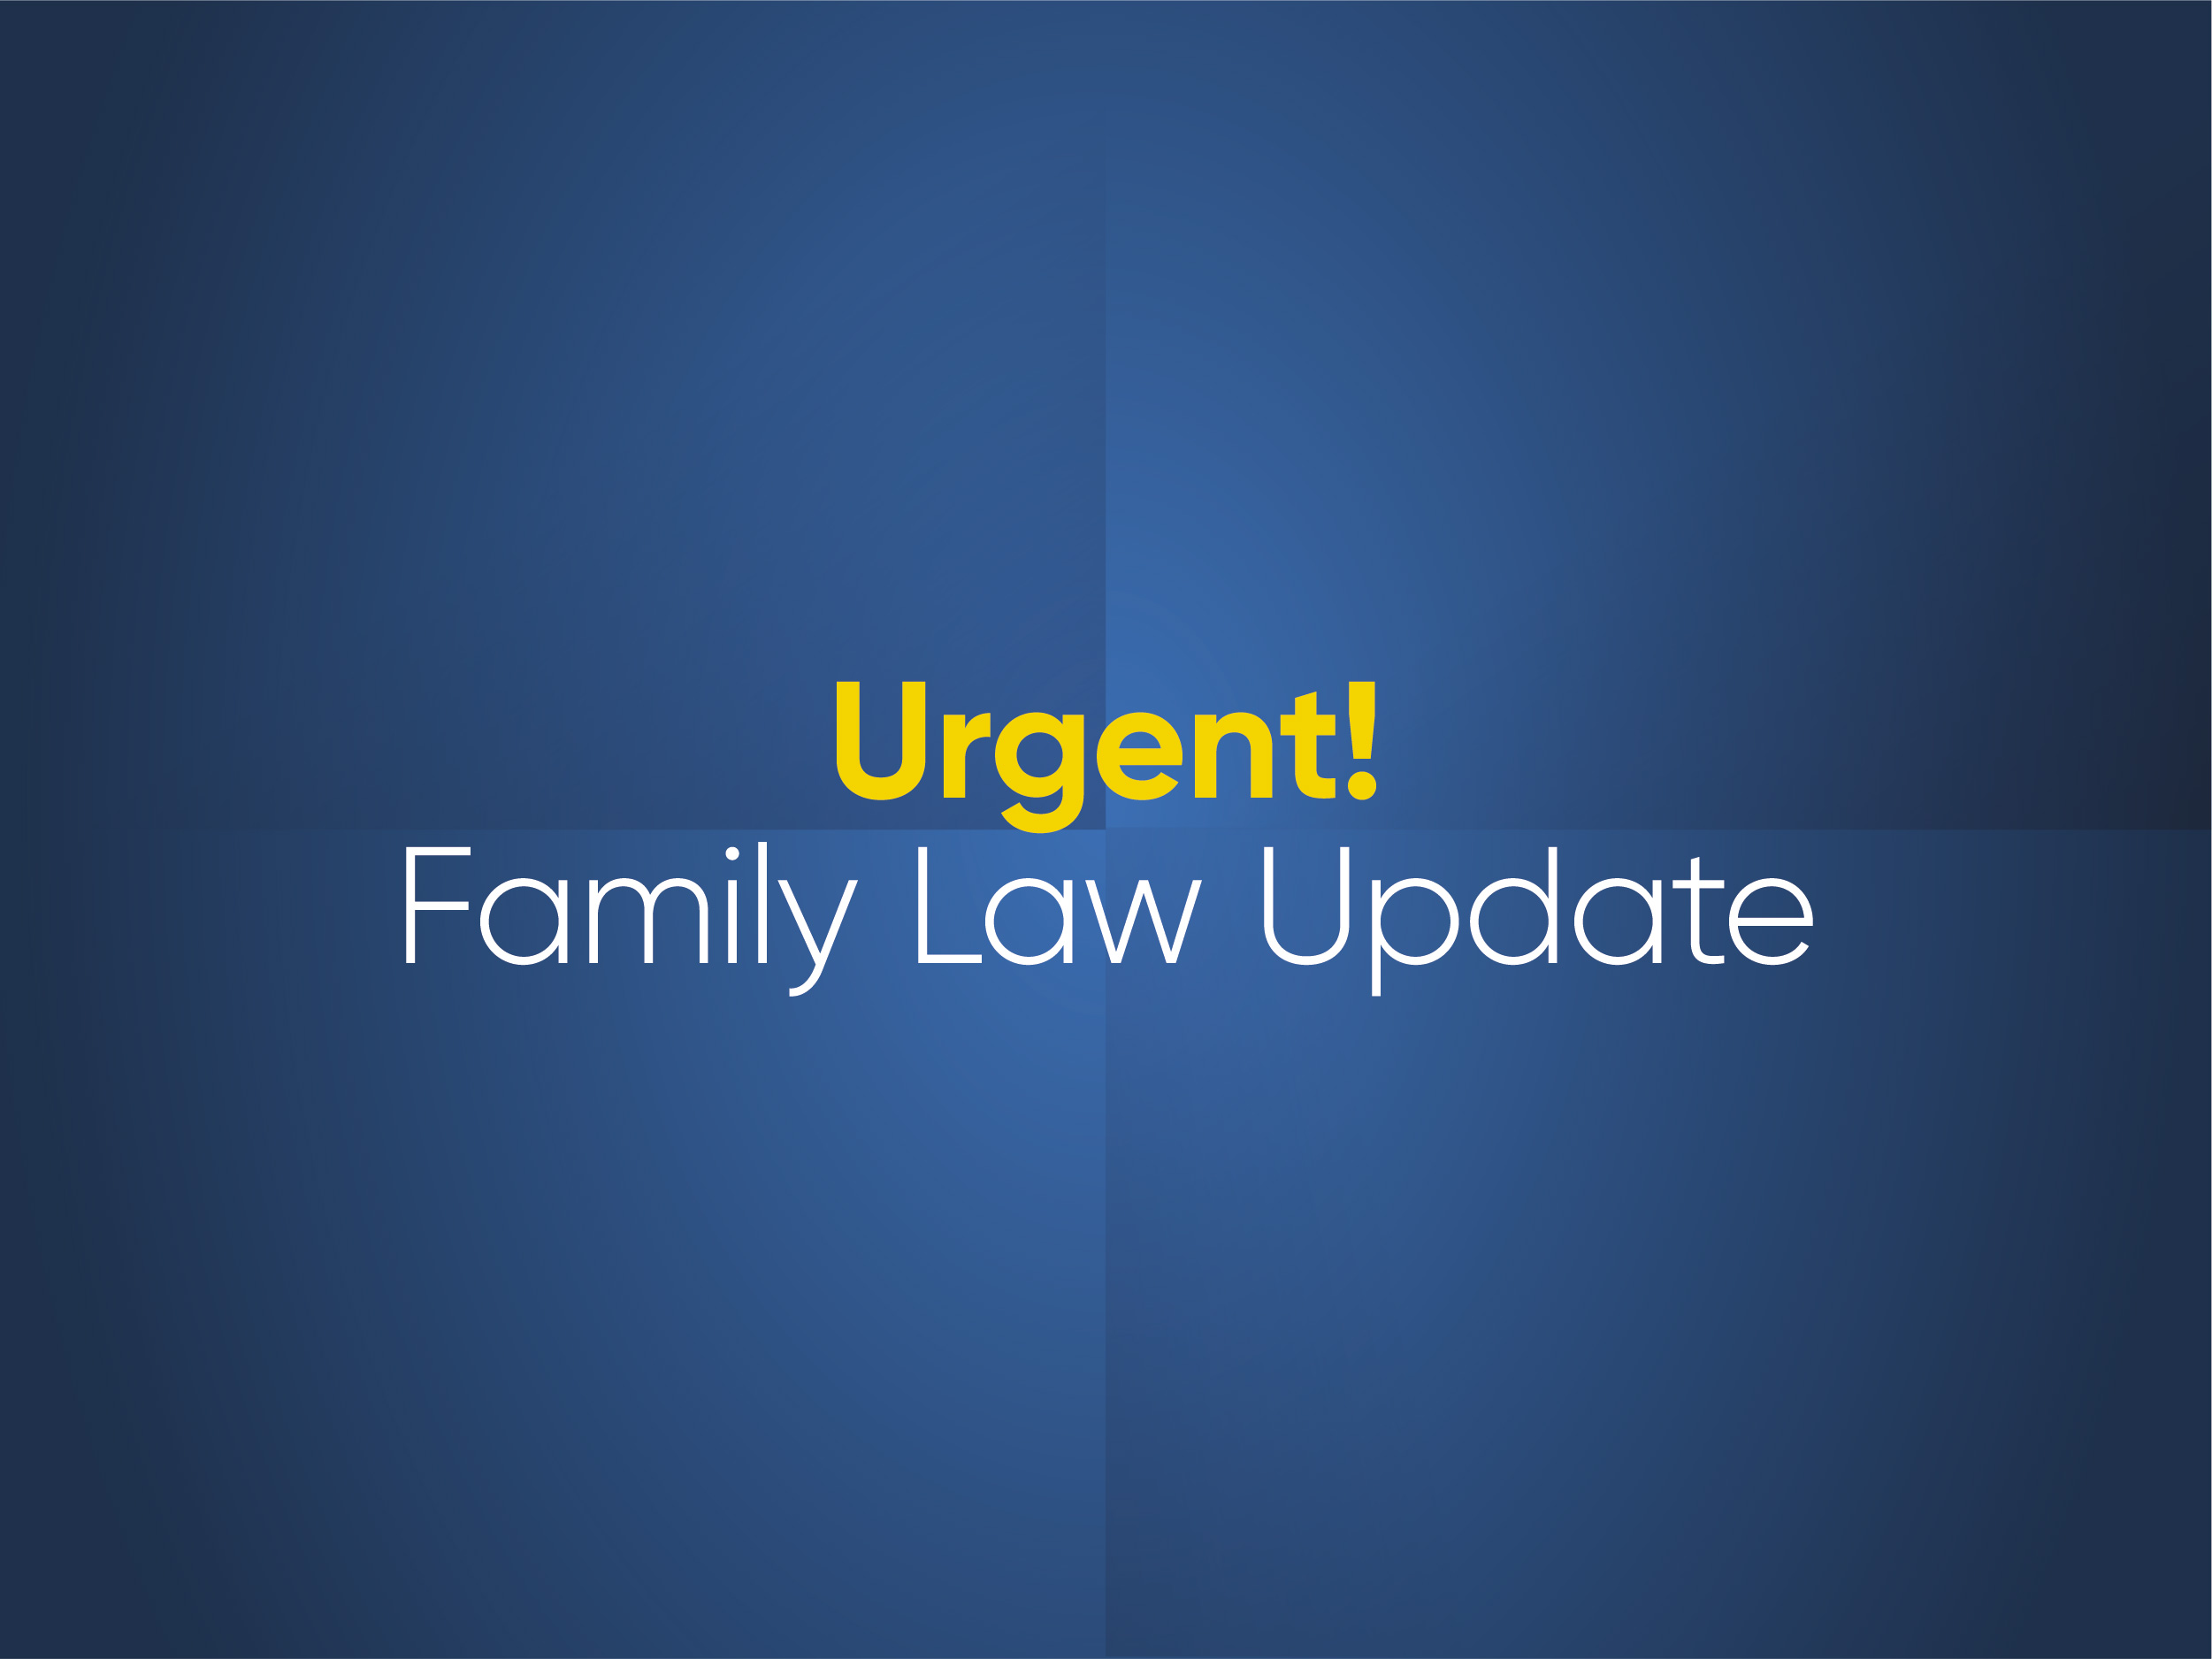 Urgent! Family Law Update